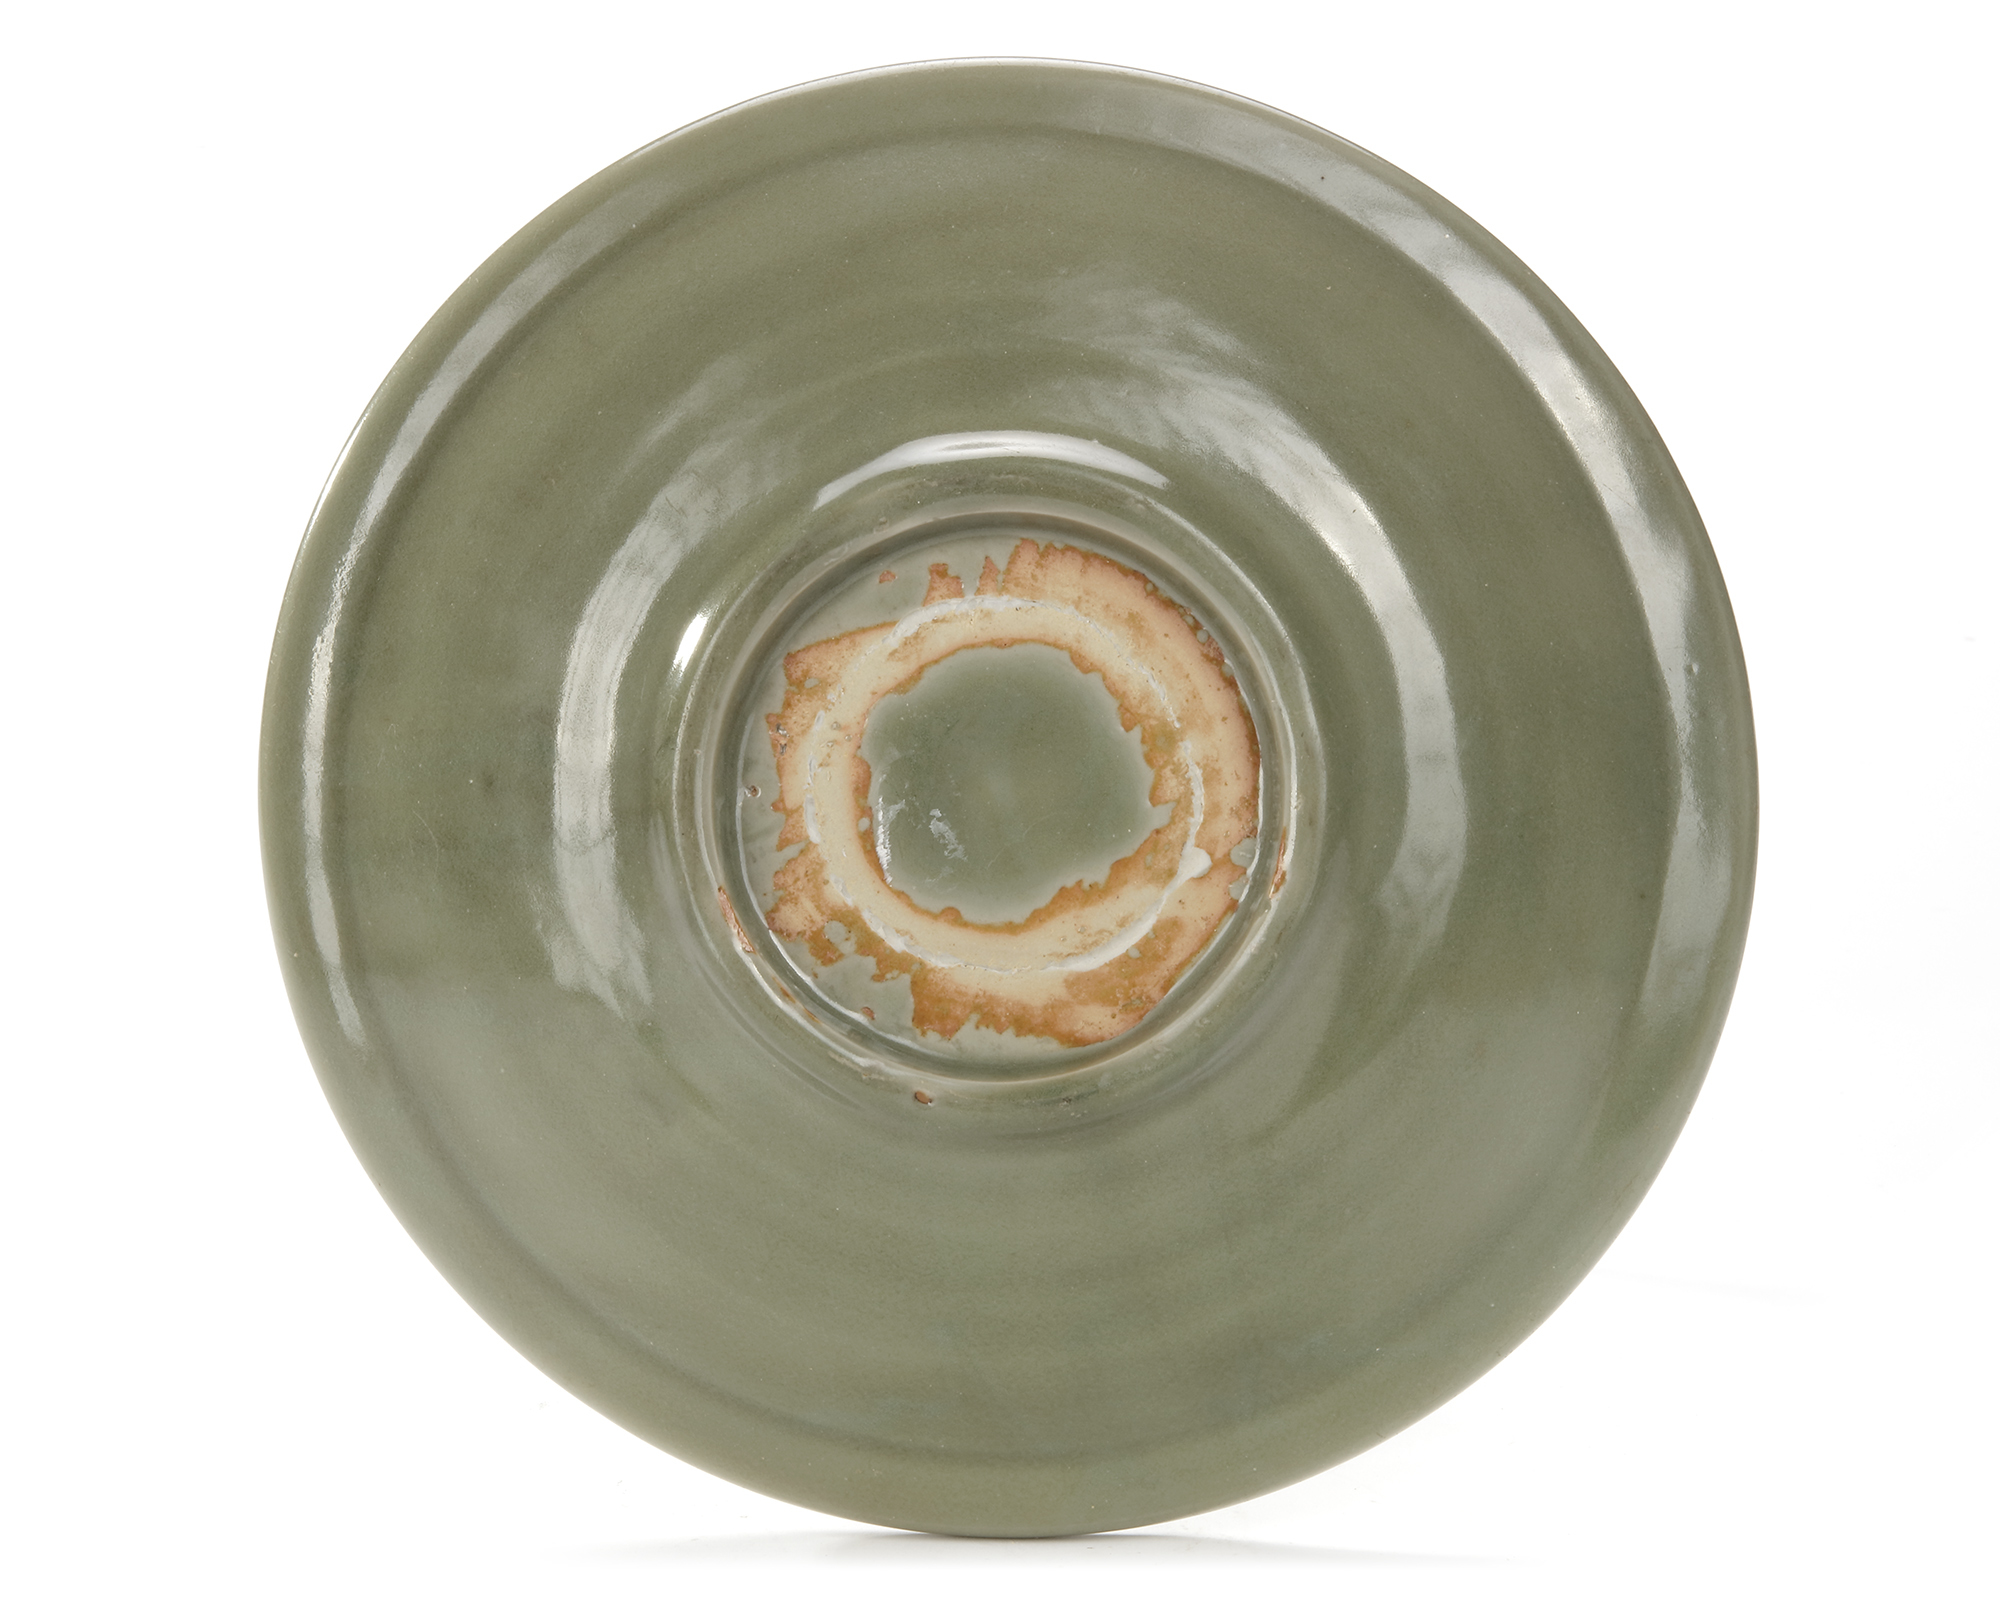 A CHINESE LONGQUAN CELADON DISH, MING DYNASTY (1368-1644) - Image 2 of 2